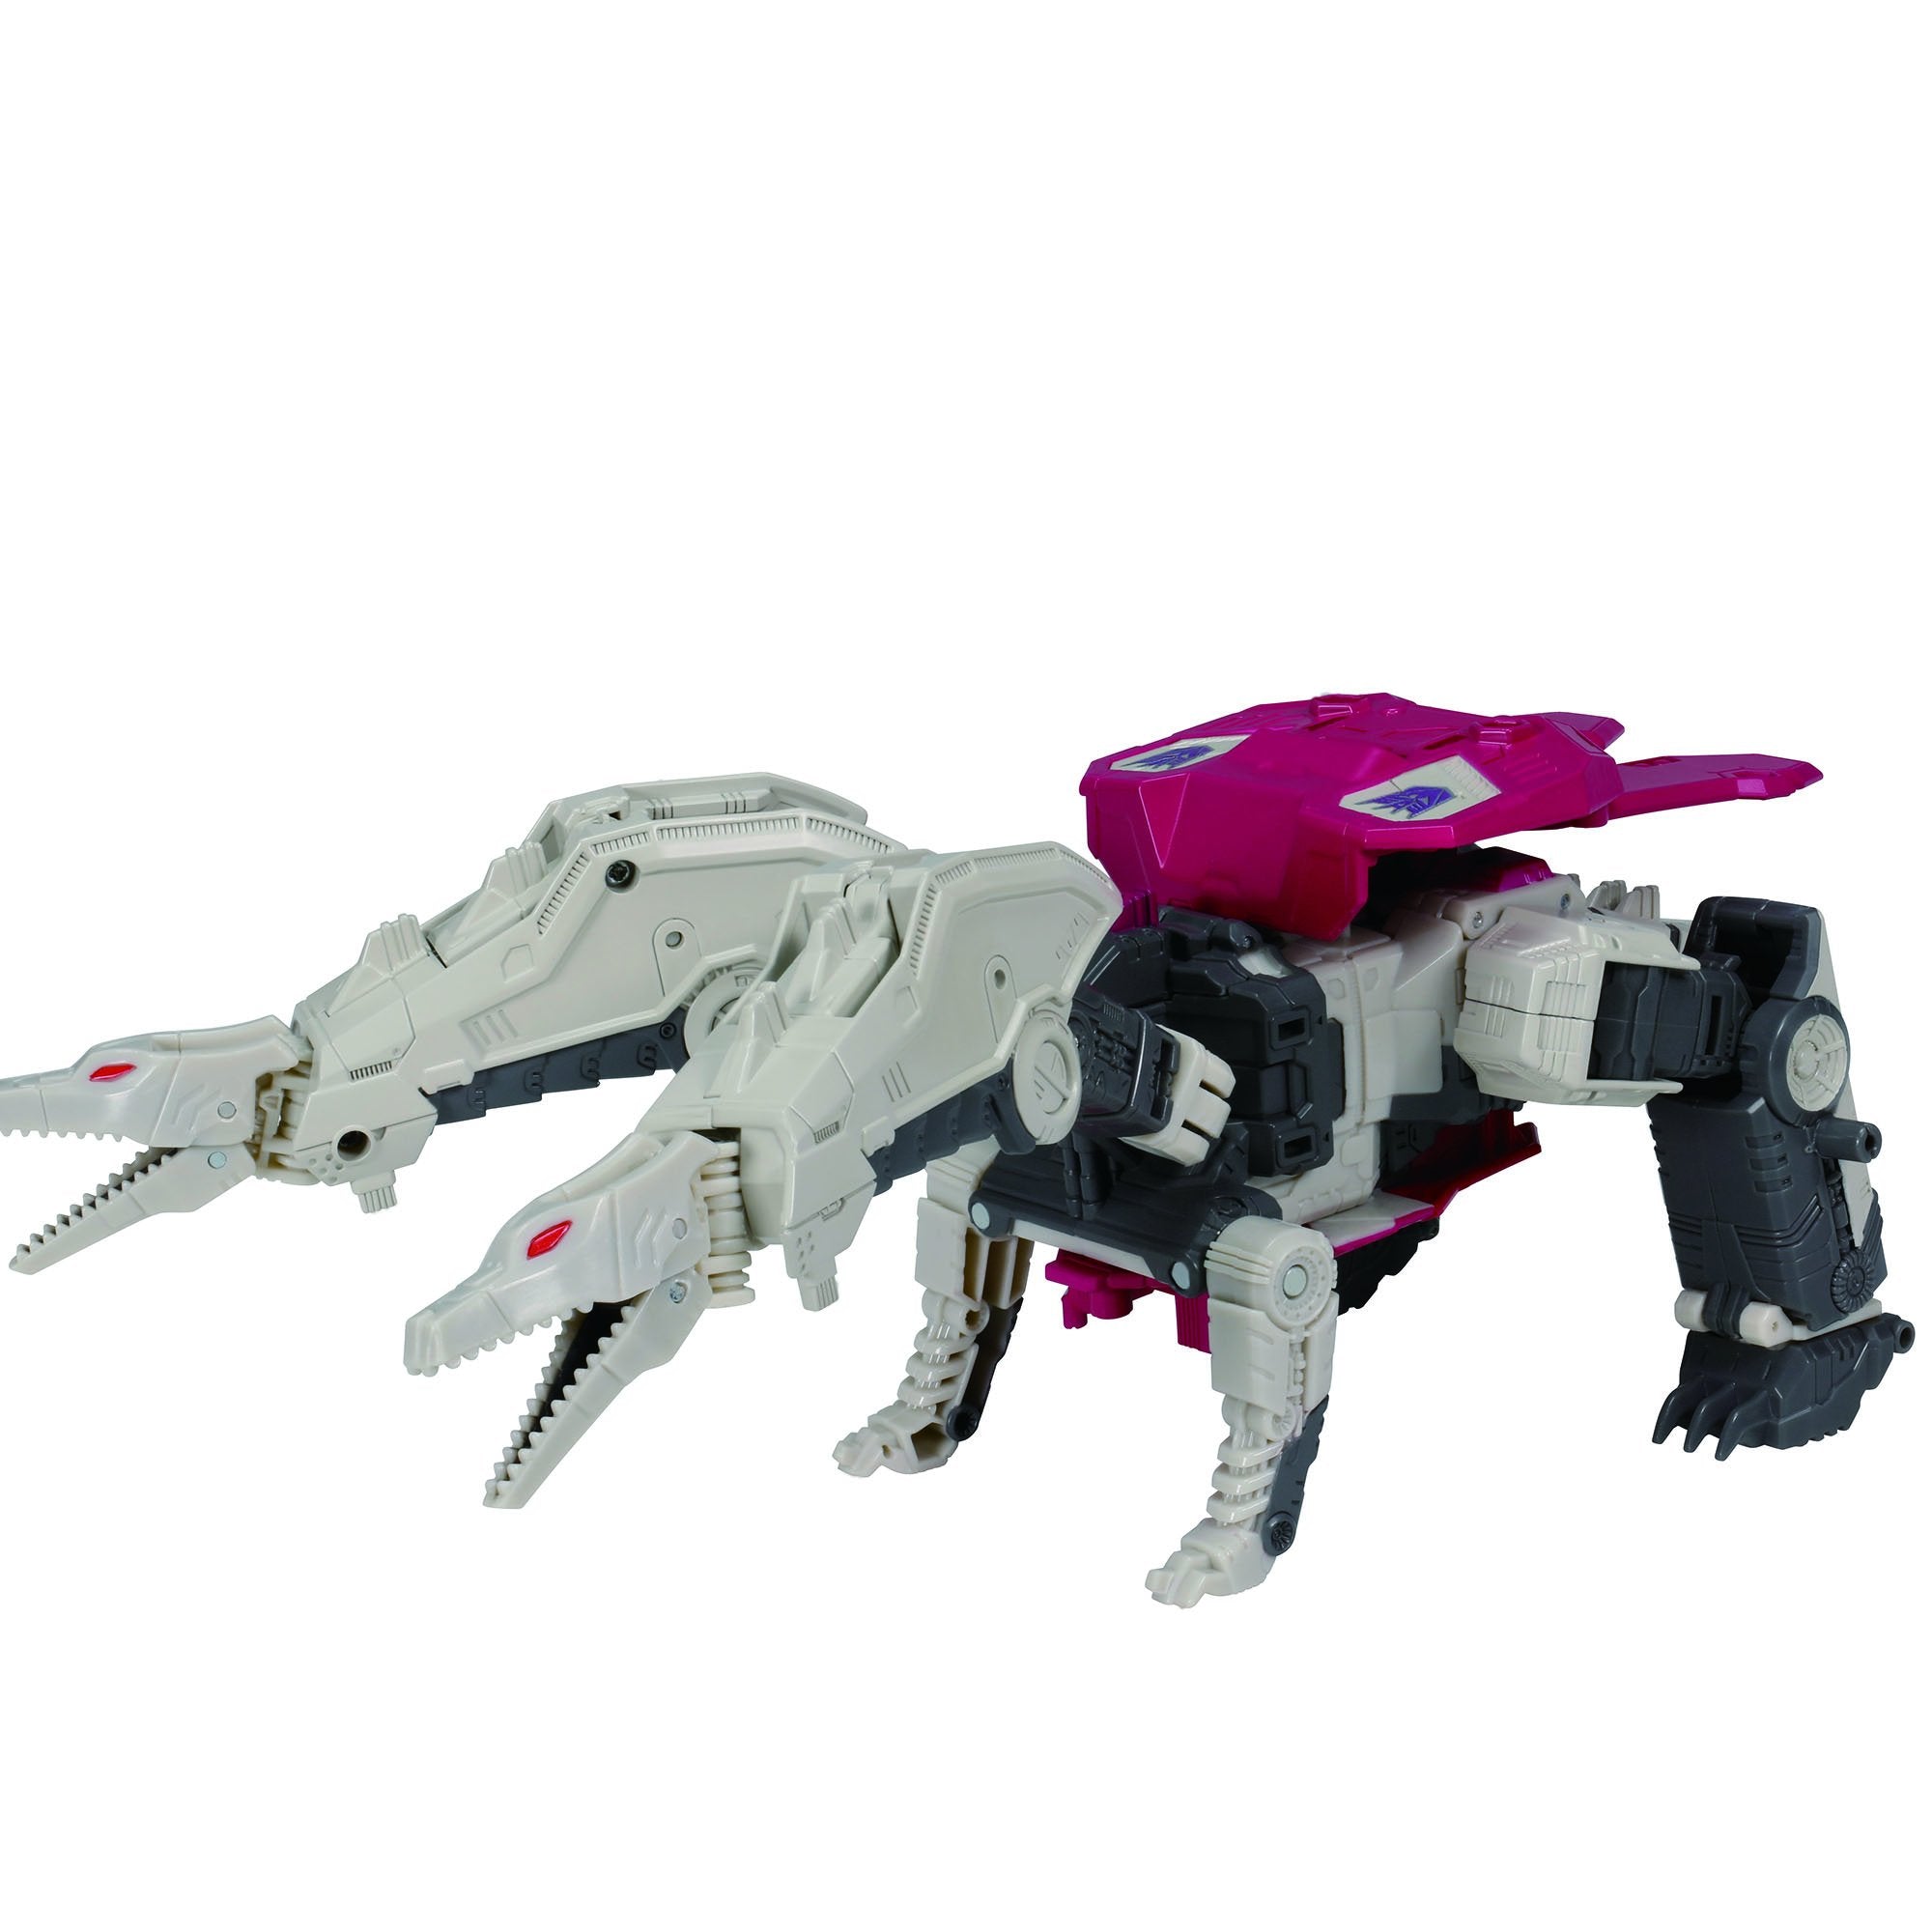 TakaraTomy - Transformers Generations Selects - Abominus (TakaraTomy Mall Exclusive)